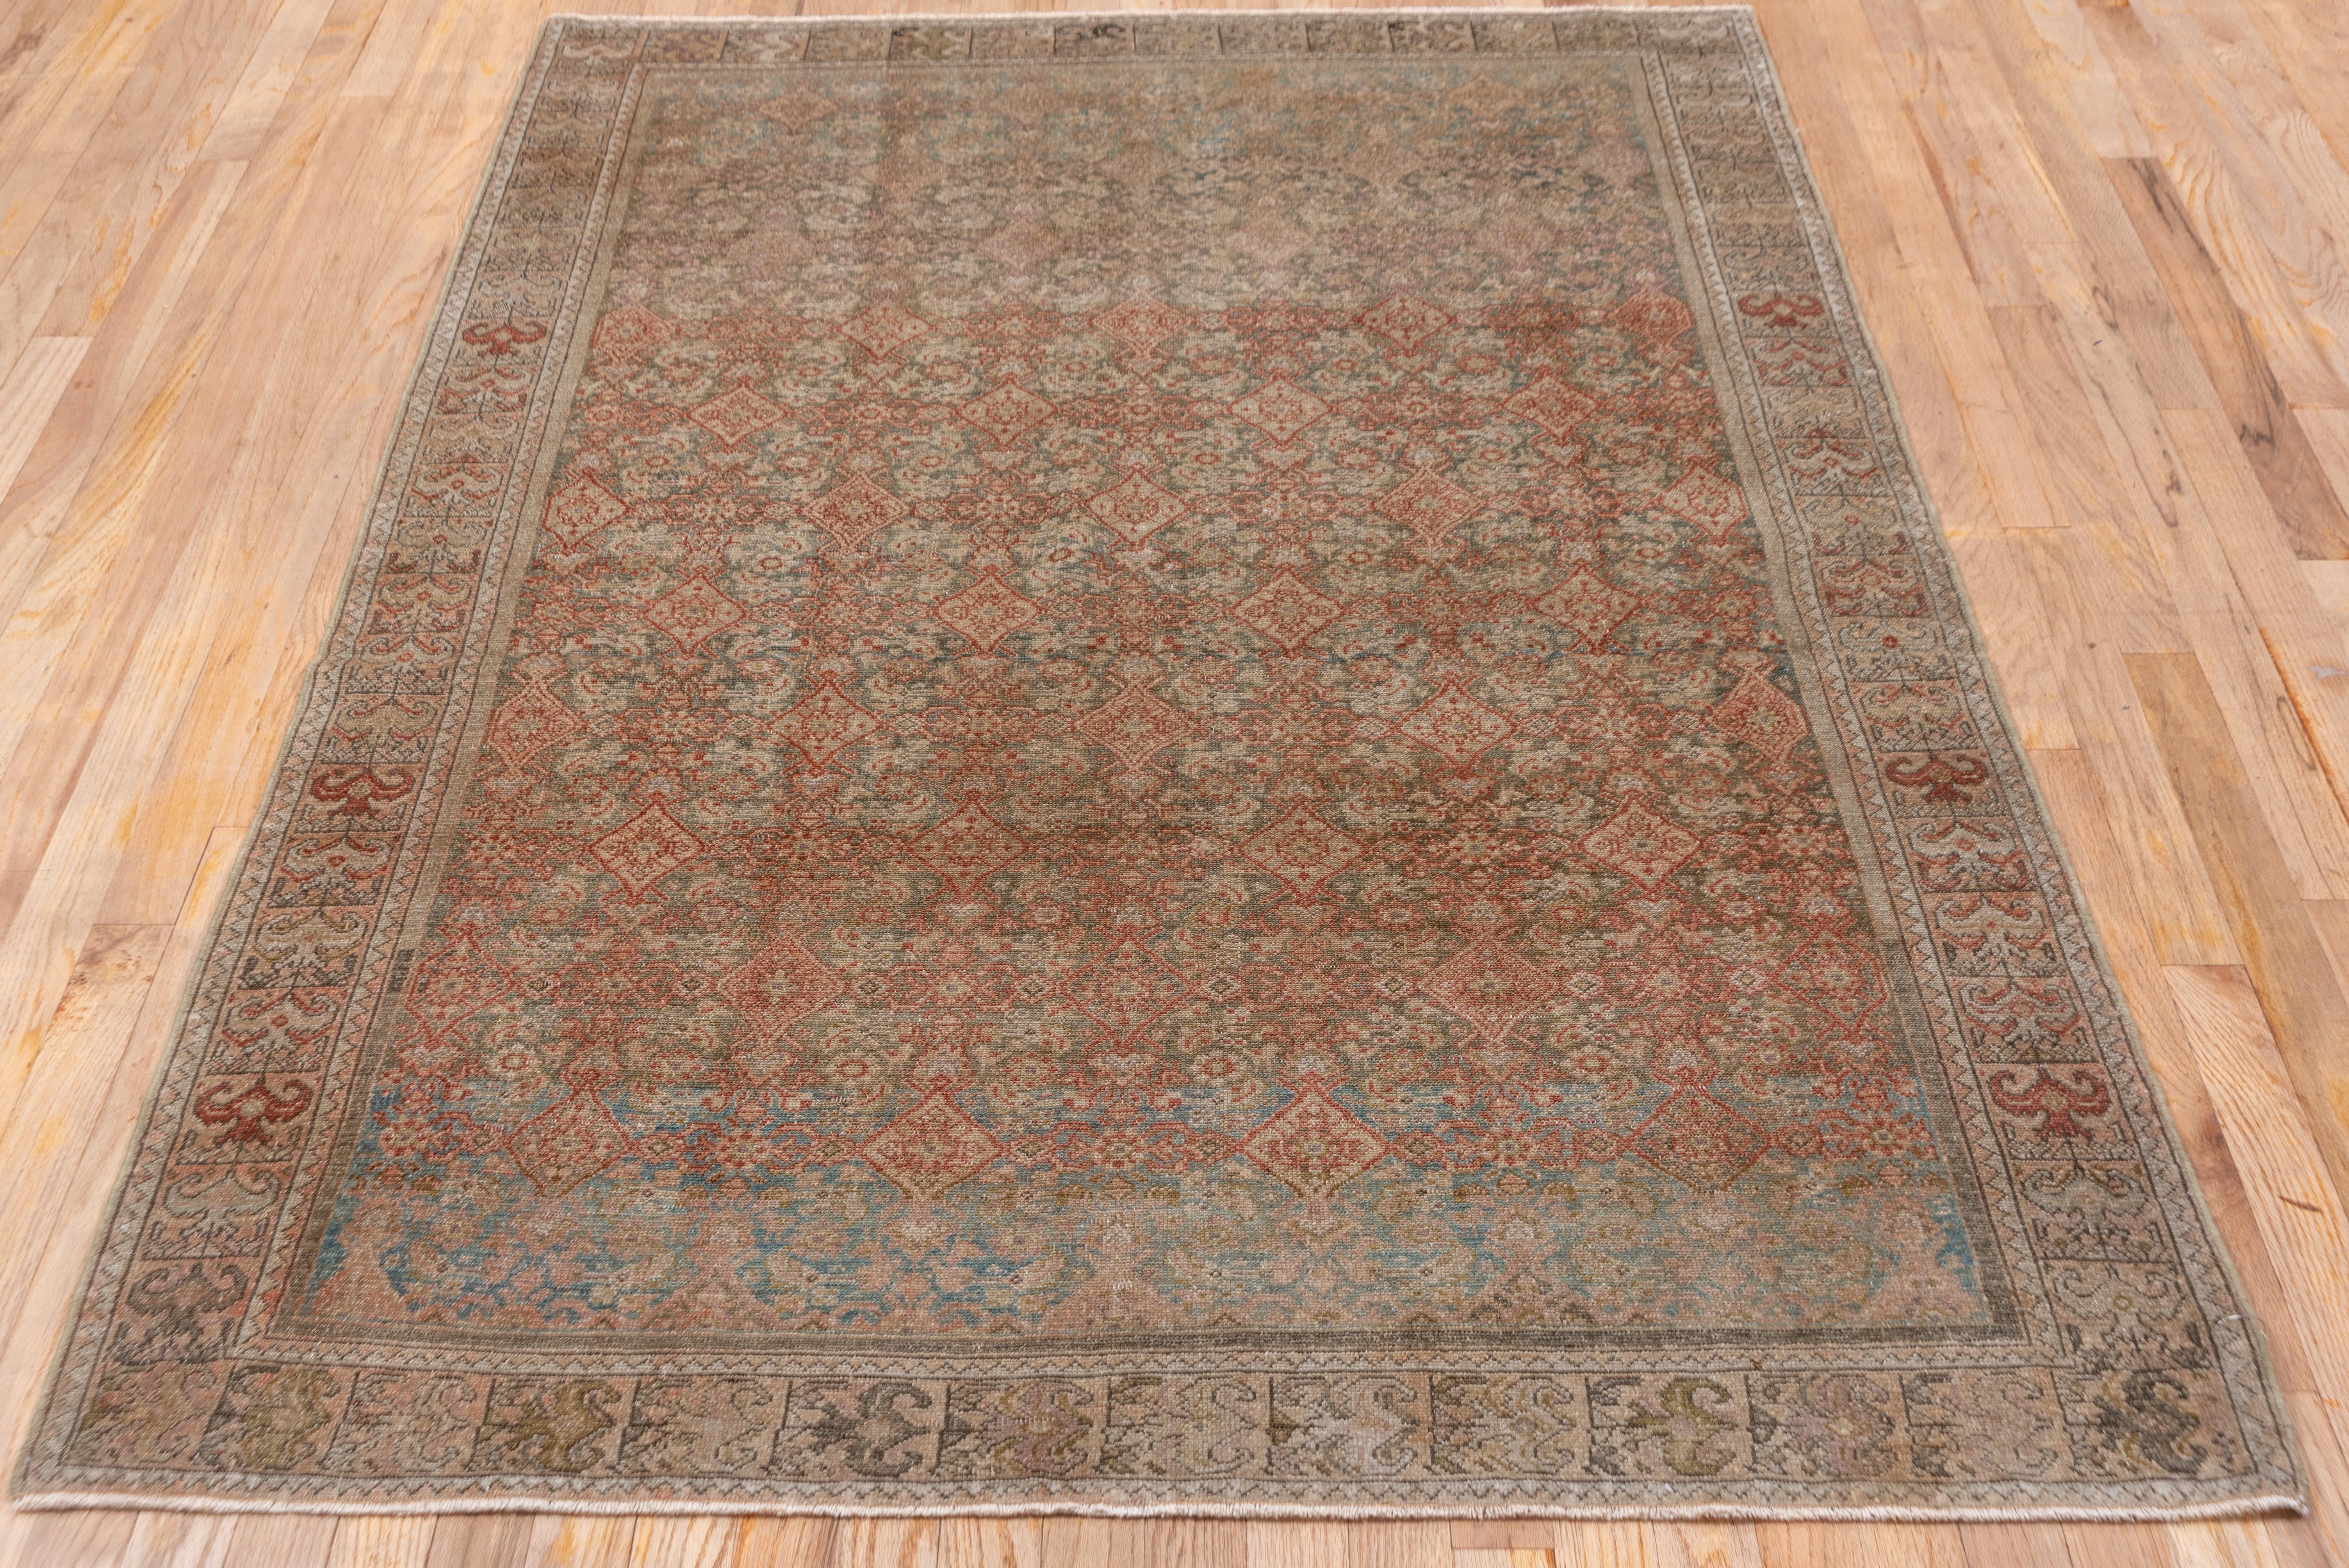 The abrashed camel-tone field displays a bold grey-blue medallion with a central branching rust sub-medallion. Rust details in corners and border. Worn low overall, fair condition.
  